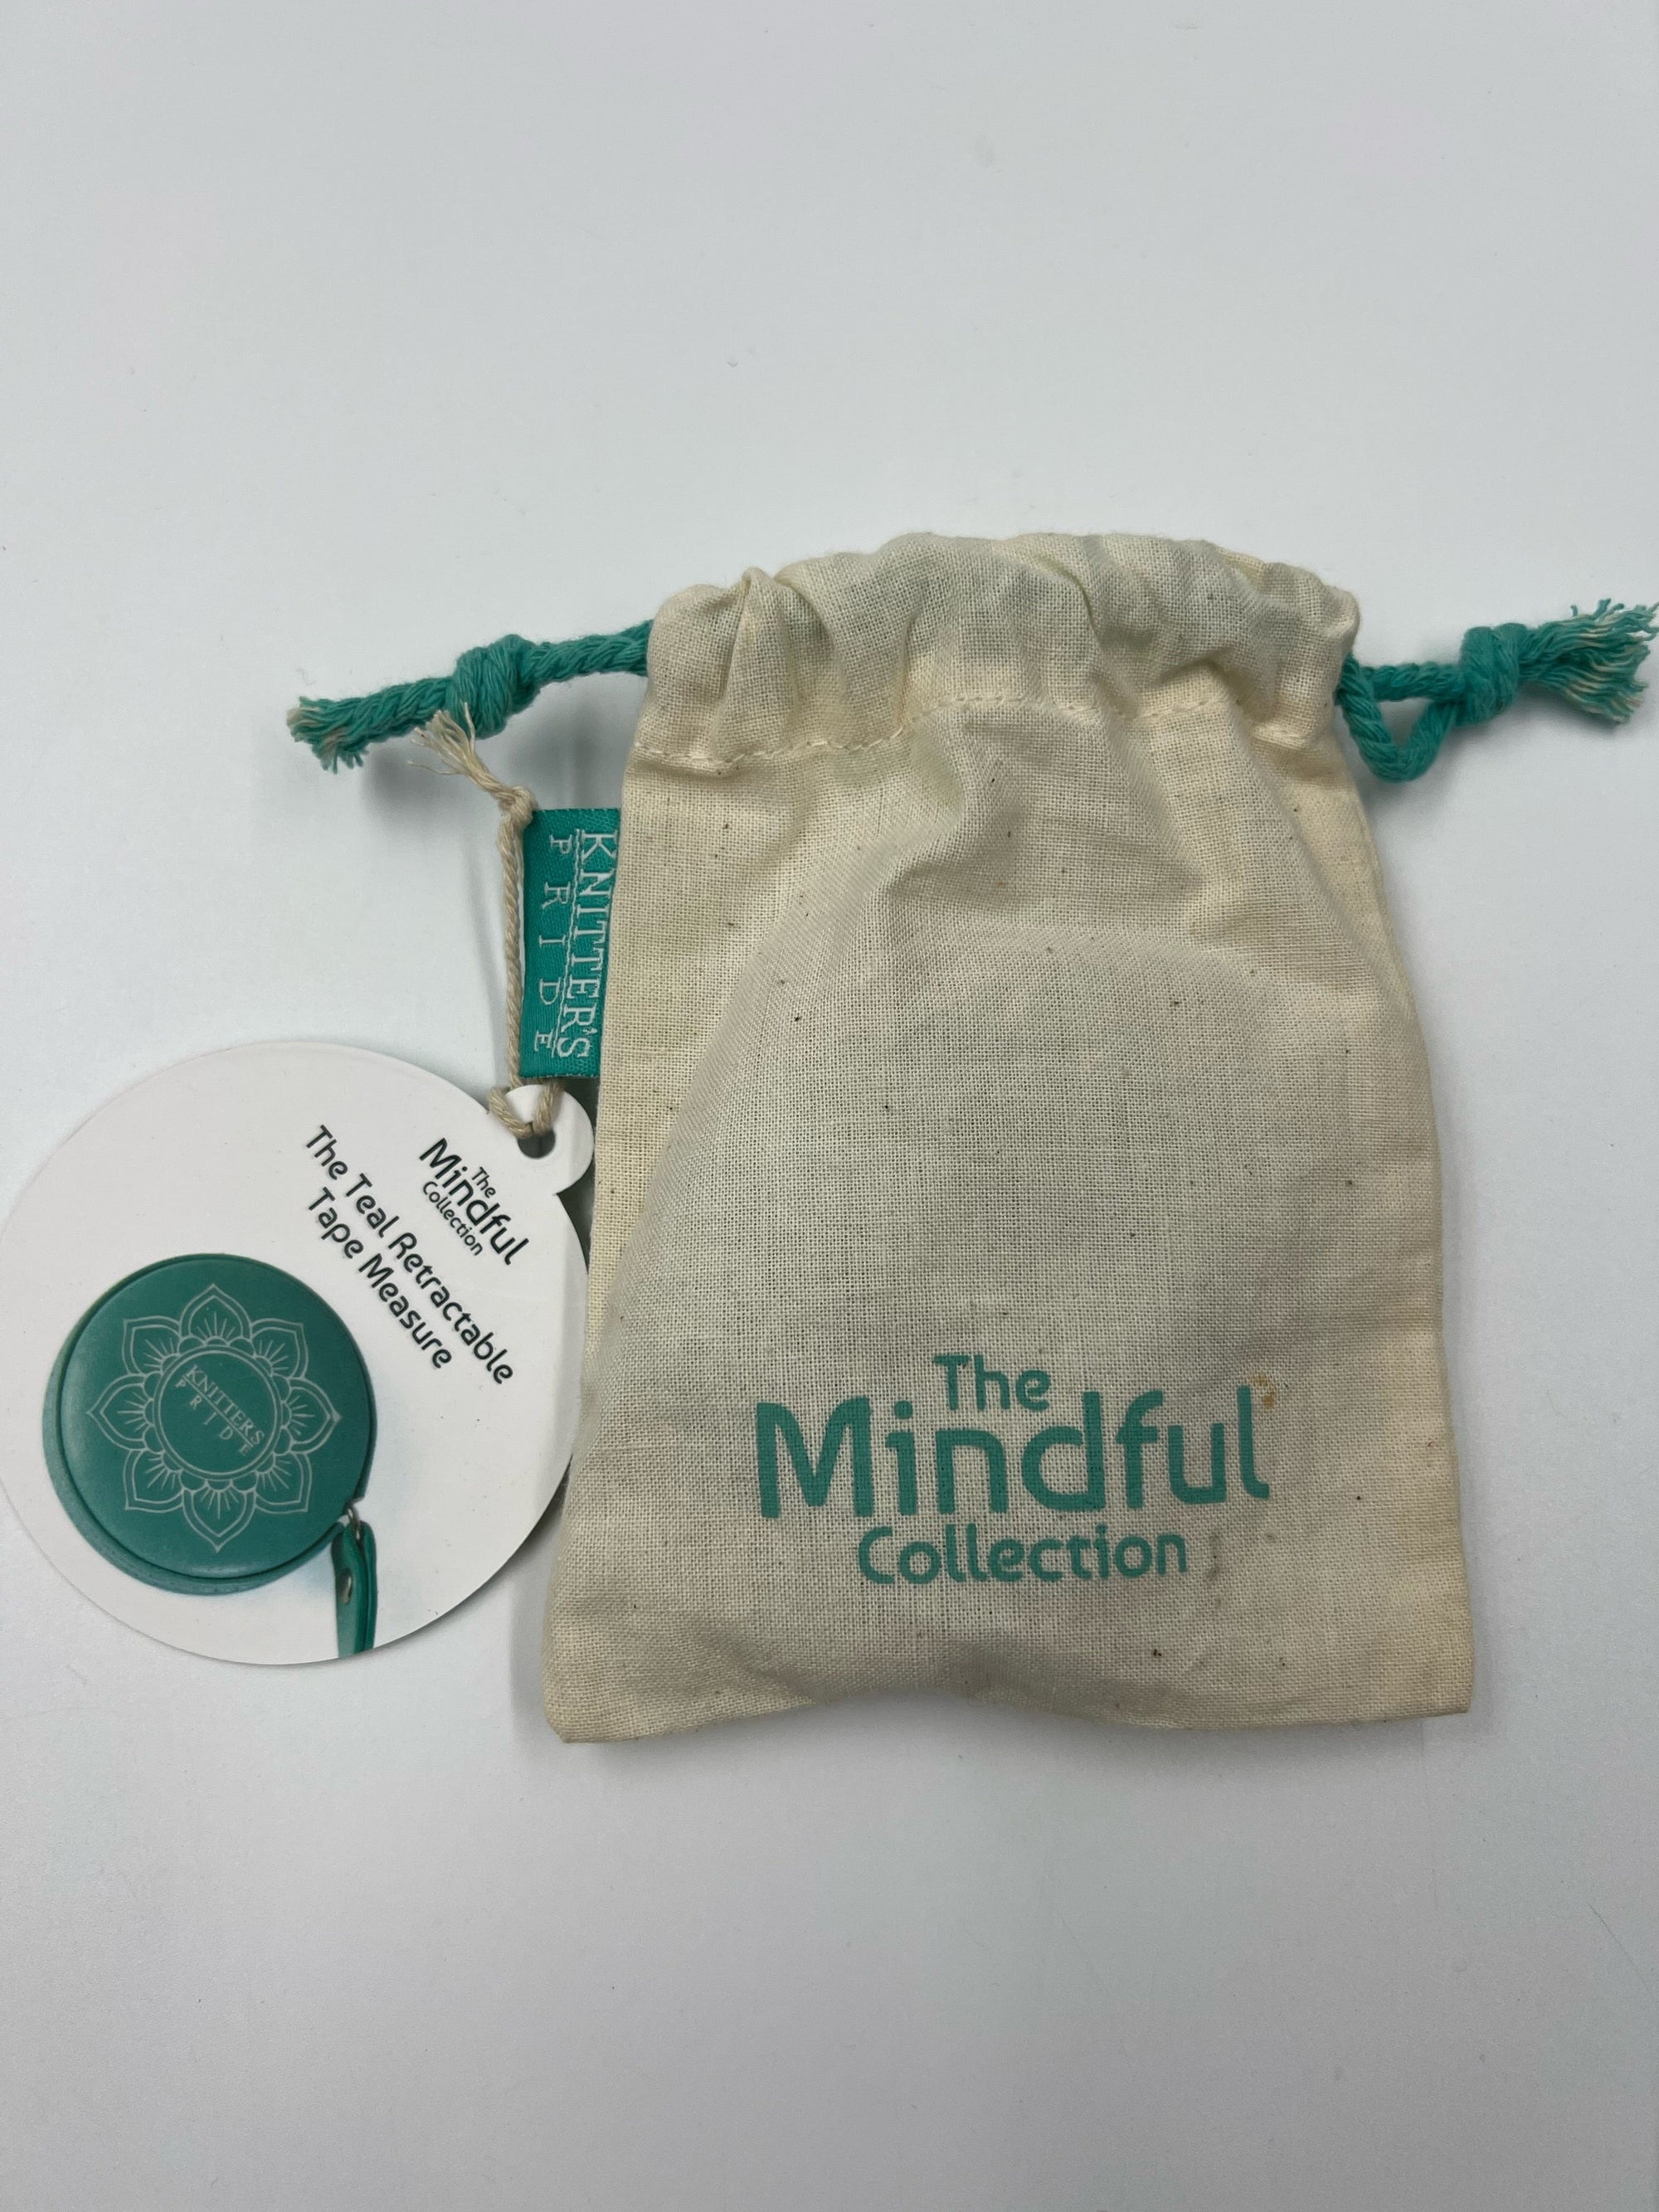 Knitter's Pride Tape Measures Mindful Collection - Tape Measure